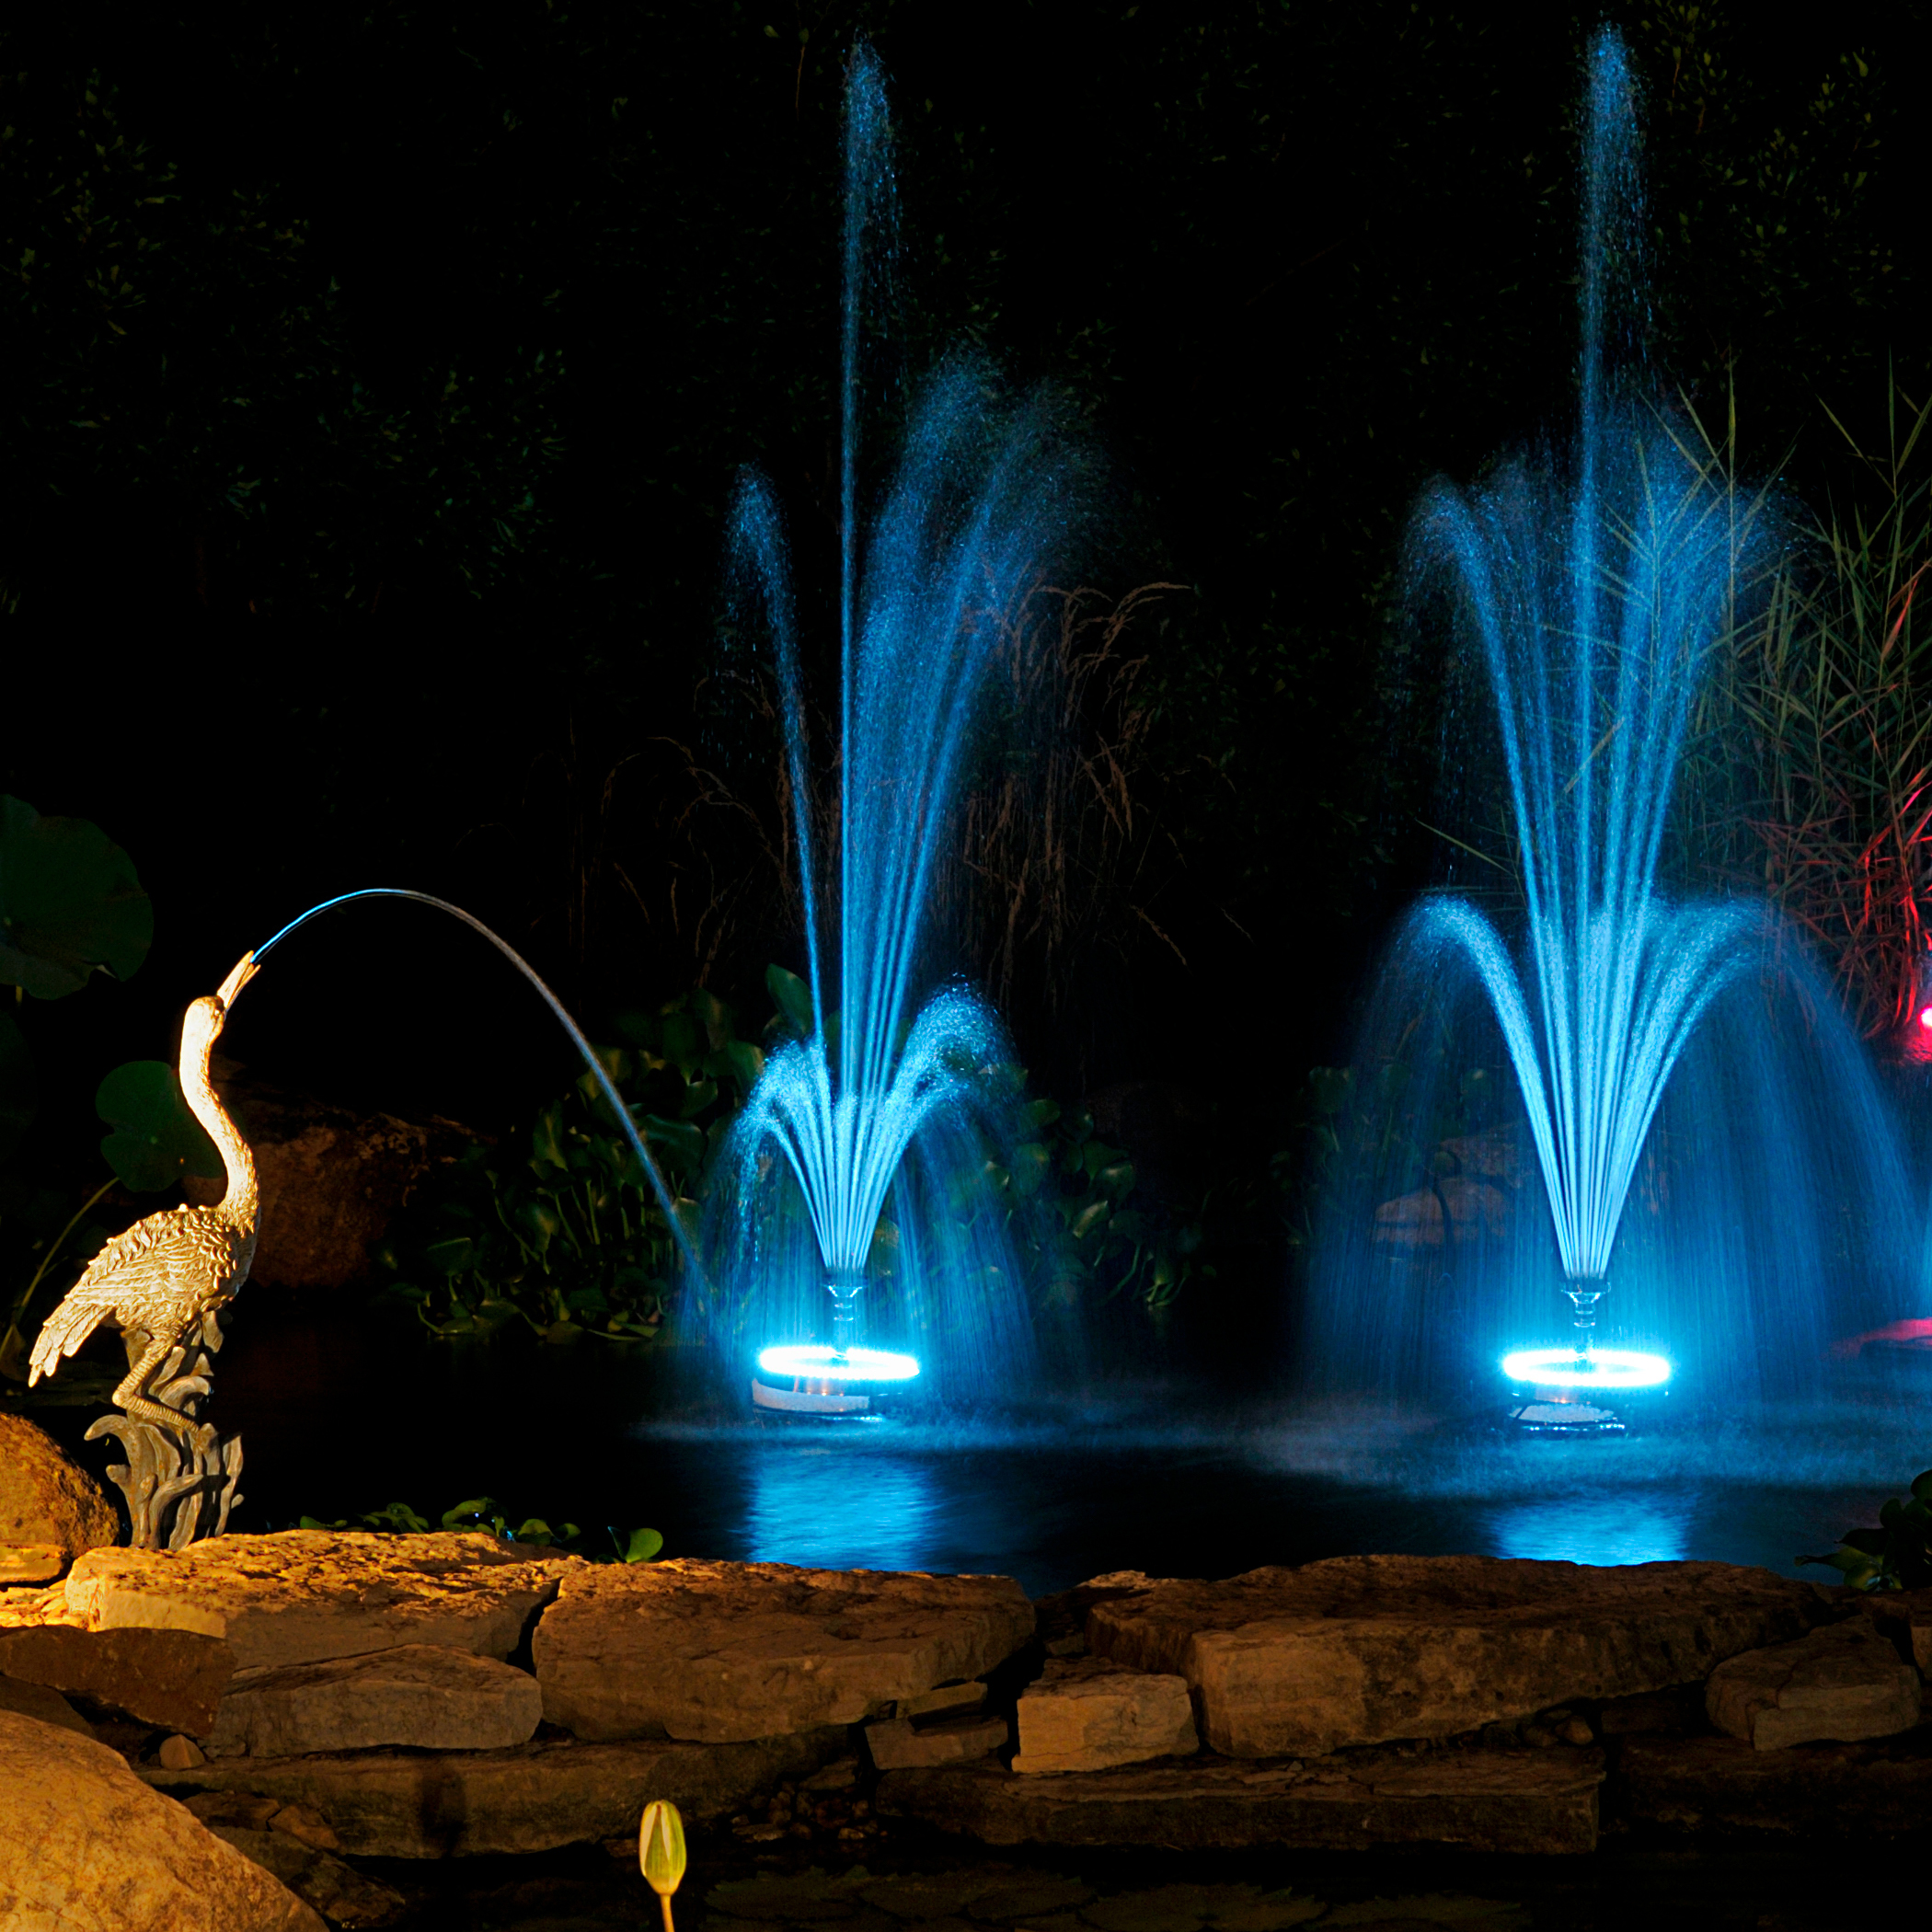 A pond in the evening lit up with three fountains on display in the background and a great blue herron spitter fountain in the foreground